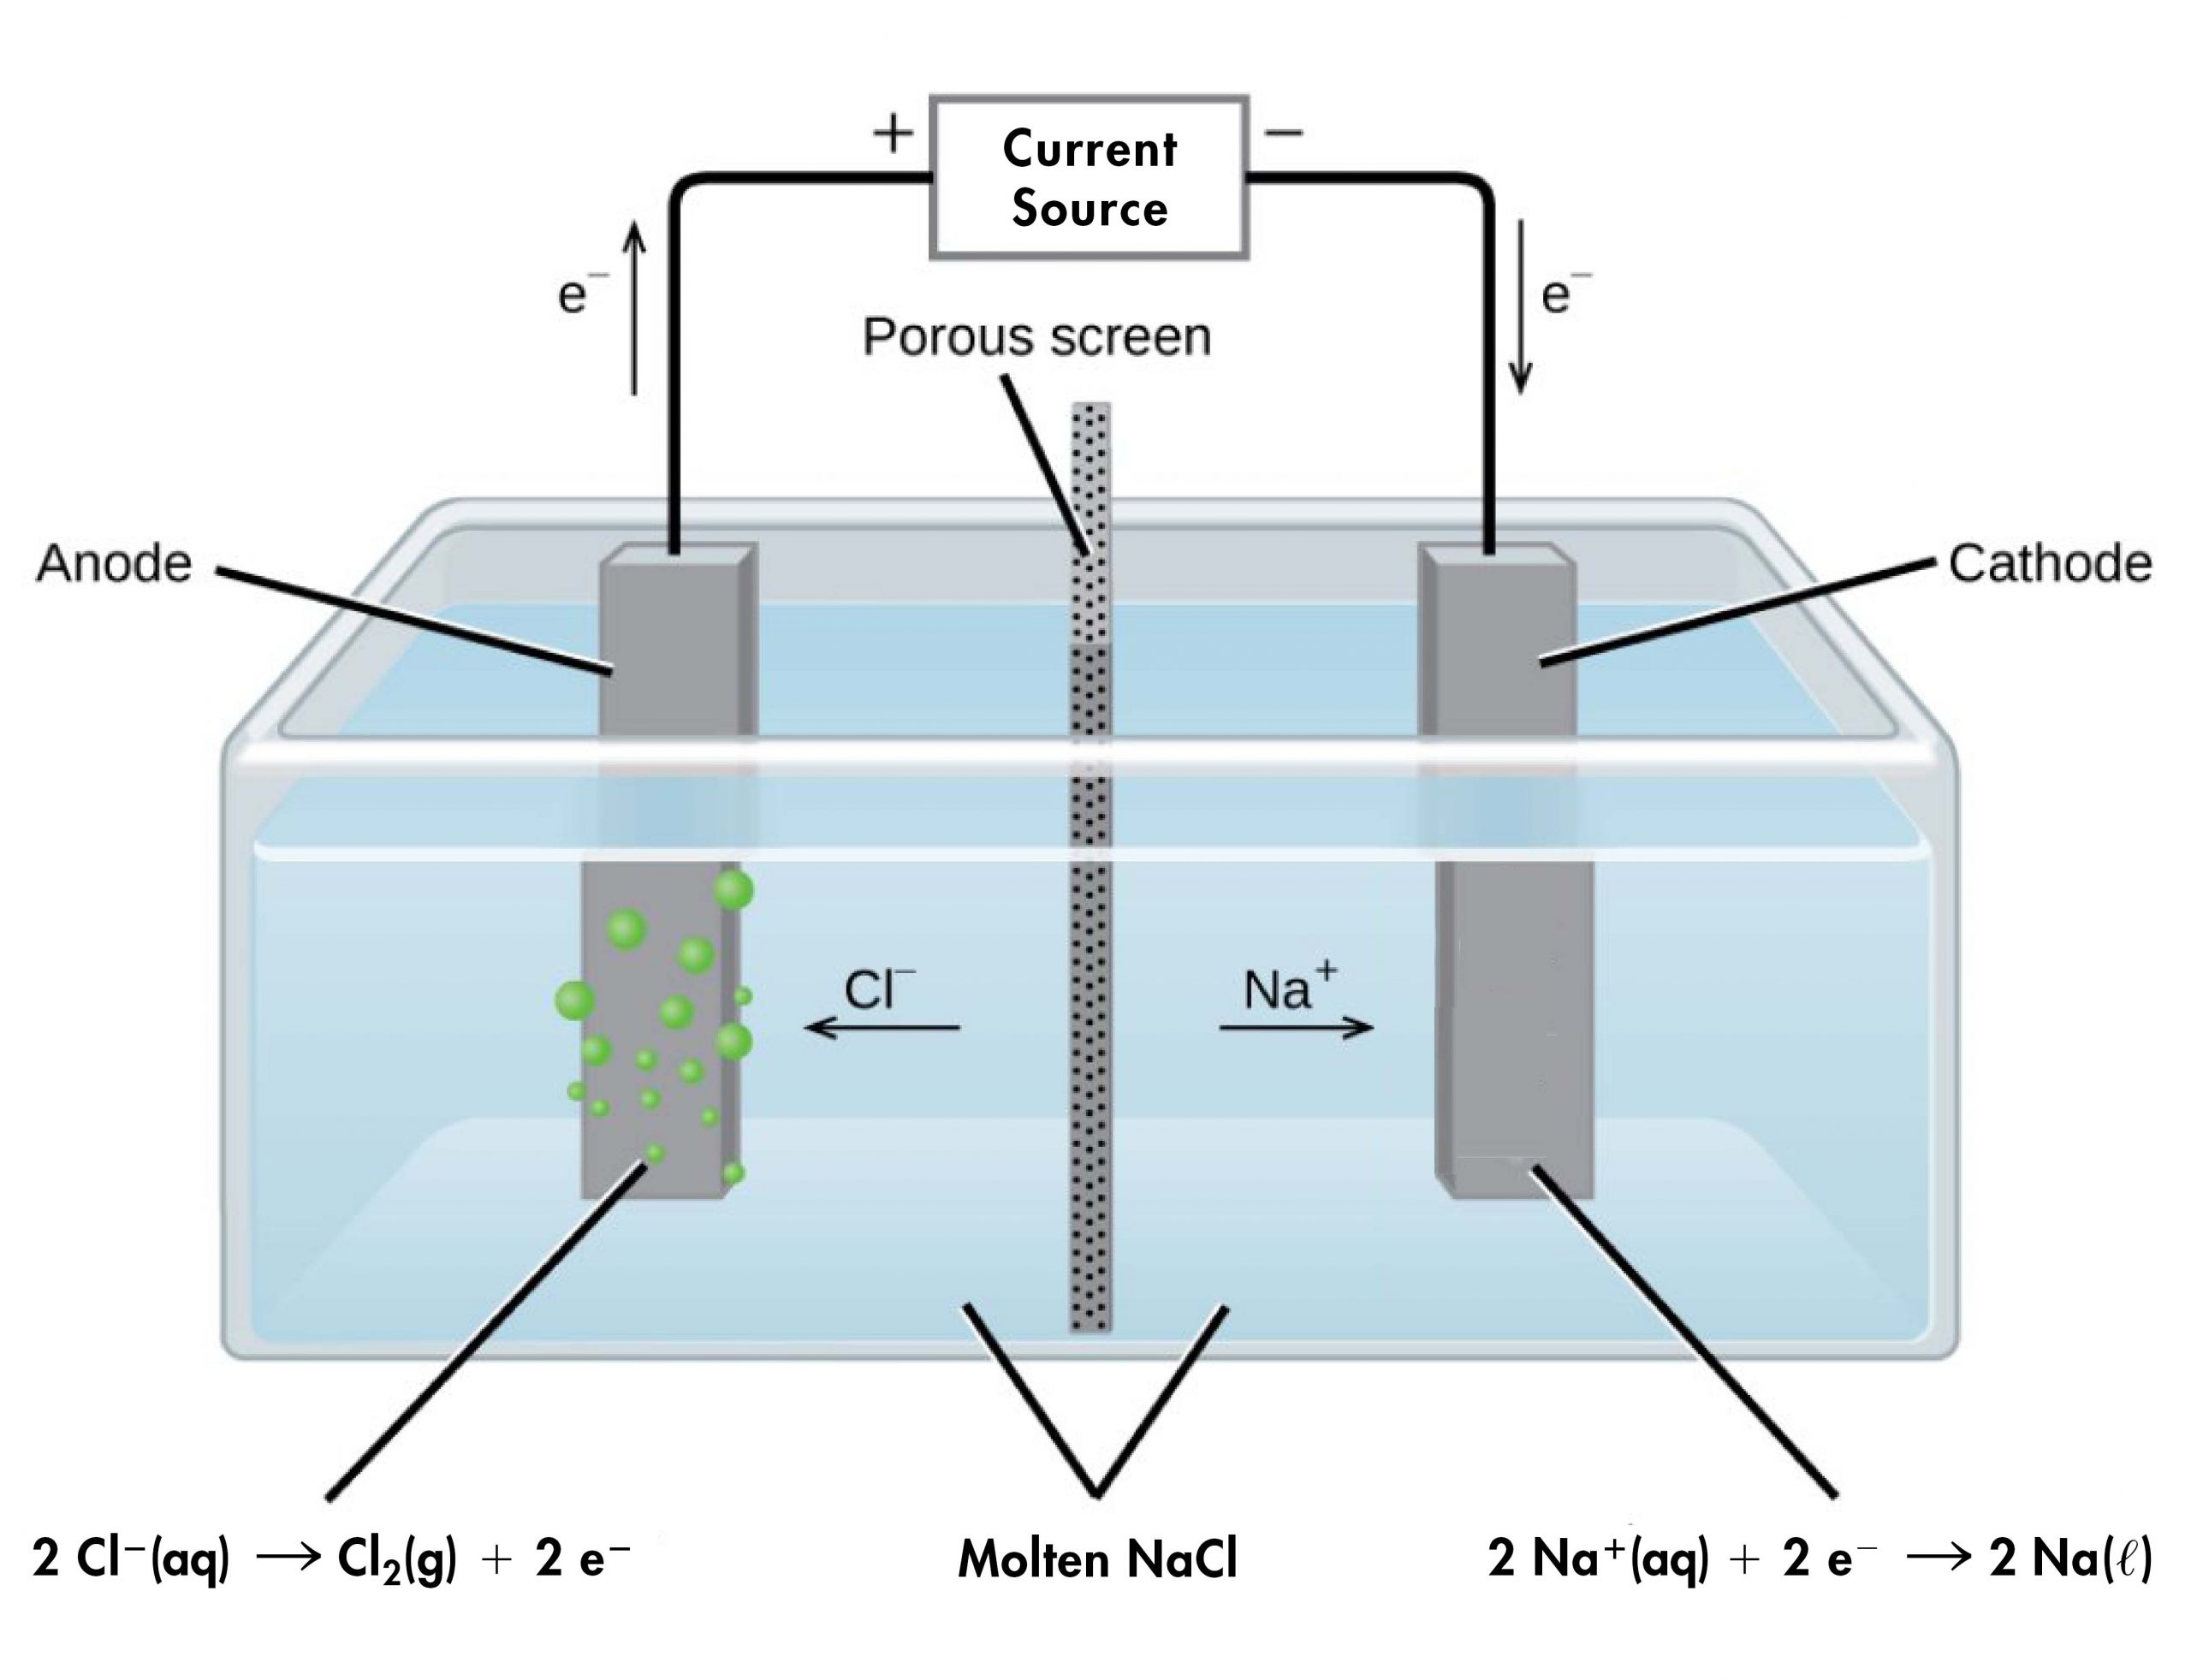 This diagram shows a tank containing a light blue liquid, labeled “Molten N a C l.” A vertical dark grey divider with small, evenly distributed dark dots, labeled “Porous screen” is located at the center of the tank dividing it into two halves. Dark grey bars are positioned at the center of each of the halves of the tank. The bar on the left, which is labeled “Anode” has green bubbles originating from it. The bar on the right which is labeled “Cathode” has no bubbles originating from it. An arrow points left from the center of the tank toward the anode, which is labeled “C l superscript negative.” An arrow points right from the center of the tank toward the cathode, which is labeled “N a superscript plus.” A line extends from the tops of the anode and cathode to a rectangle centrally placed above the tank which is labeled “Current source.” An arrow extends upward above the anode to the left of the line which is labeled “e superscript negative.” A plus symbol is located to the left of the current source and a negative sign is located to its right. An arrow points downward along the line segment leading to the cathode. This arrow is labeled “e superscript negative.” Below the left side of the diagram is the label “2 C l superscript negative ( a q ) right pointing arrow C l subscript 2 ( g ) plus 2 e superscript negative.” At the right, below the diagram is the label “2 N a superscript positive ( a q ) plus 2 e superscript negative right pointing arrow 2 N a ( l ).”